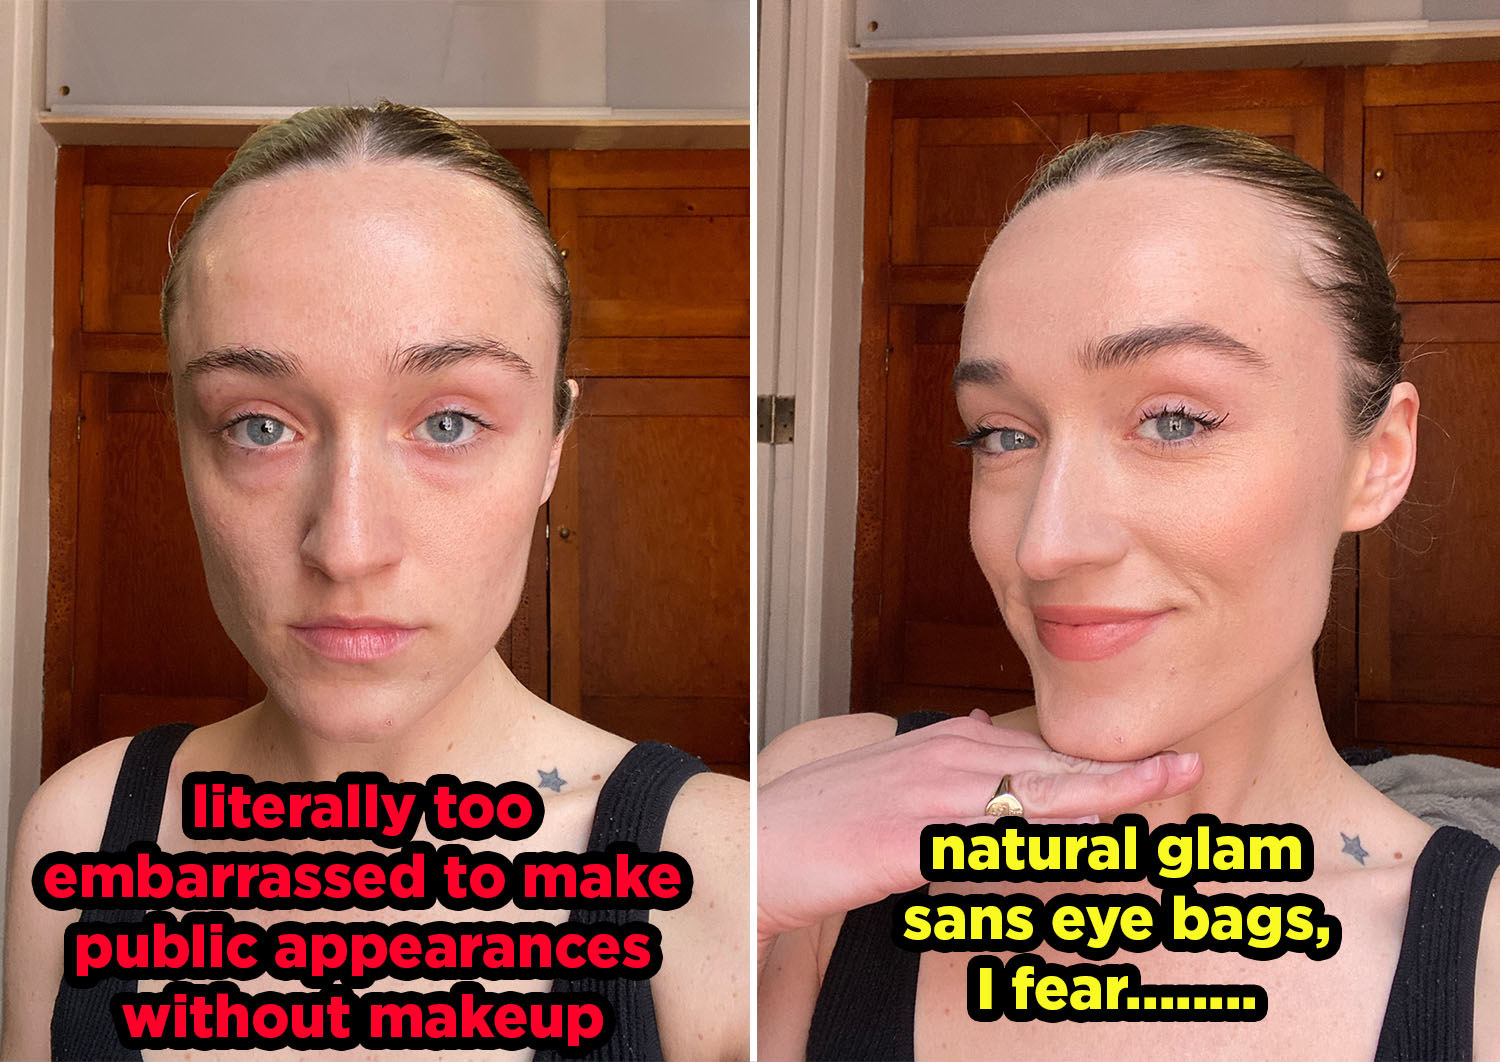 Does The Viral White Concealer Trend on TikTok Actually Work?